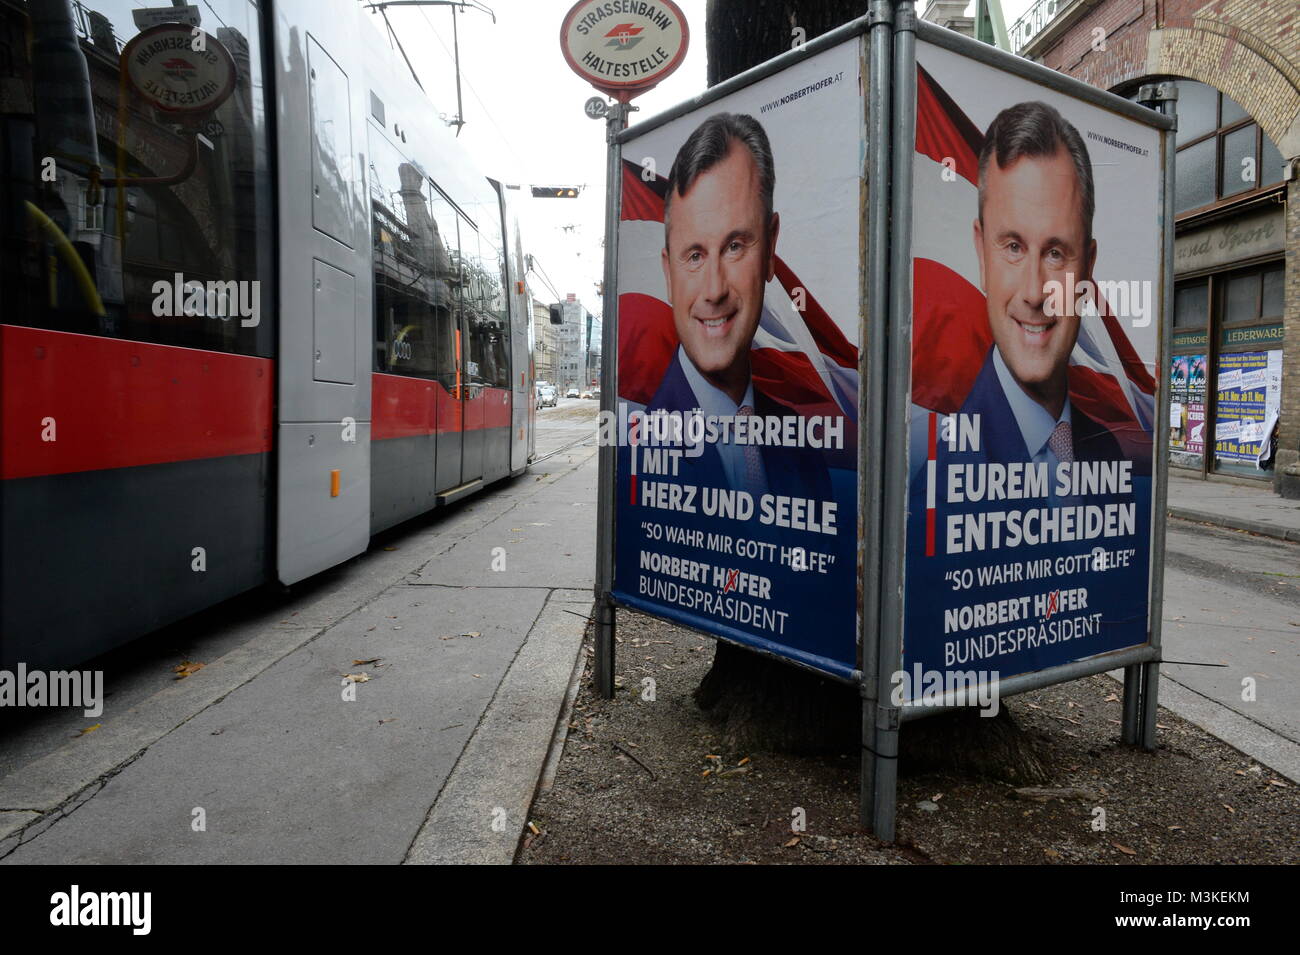 Vienna, Austria. 29.Oct.2016. New poster campaign with the candidate of the FPÖ (Freedom Party Austria), Norbert Hofer for the federal presidential election on 4 December in Austria. © Franz Perc/Alamy Live News Stock Photo